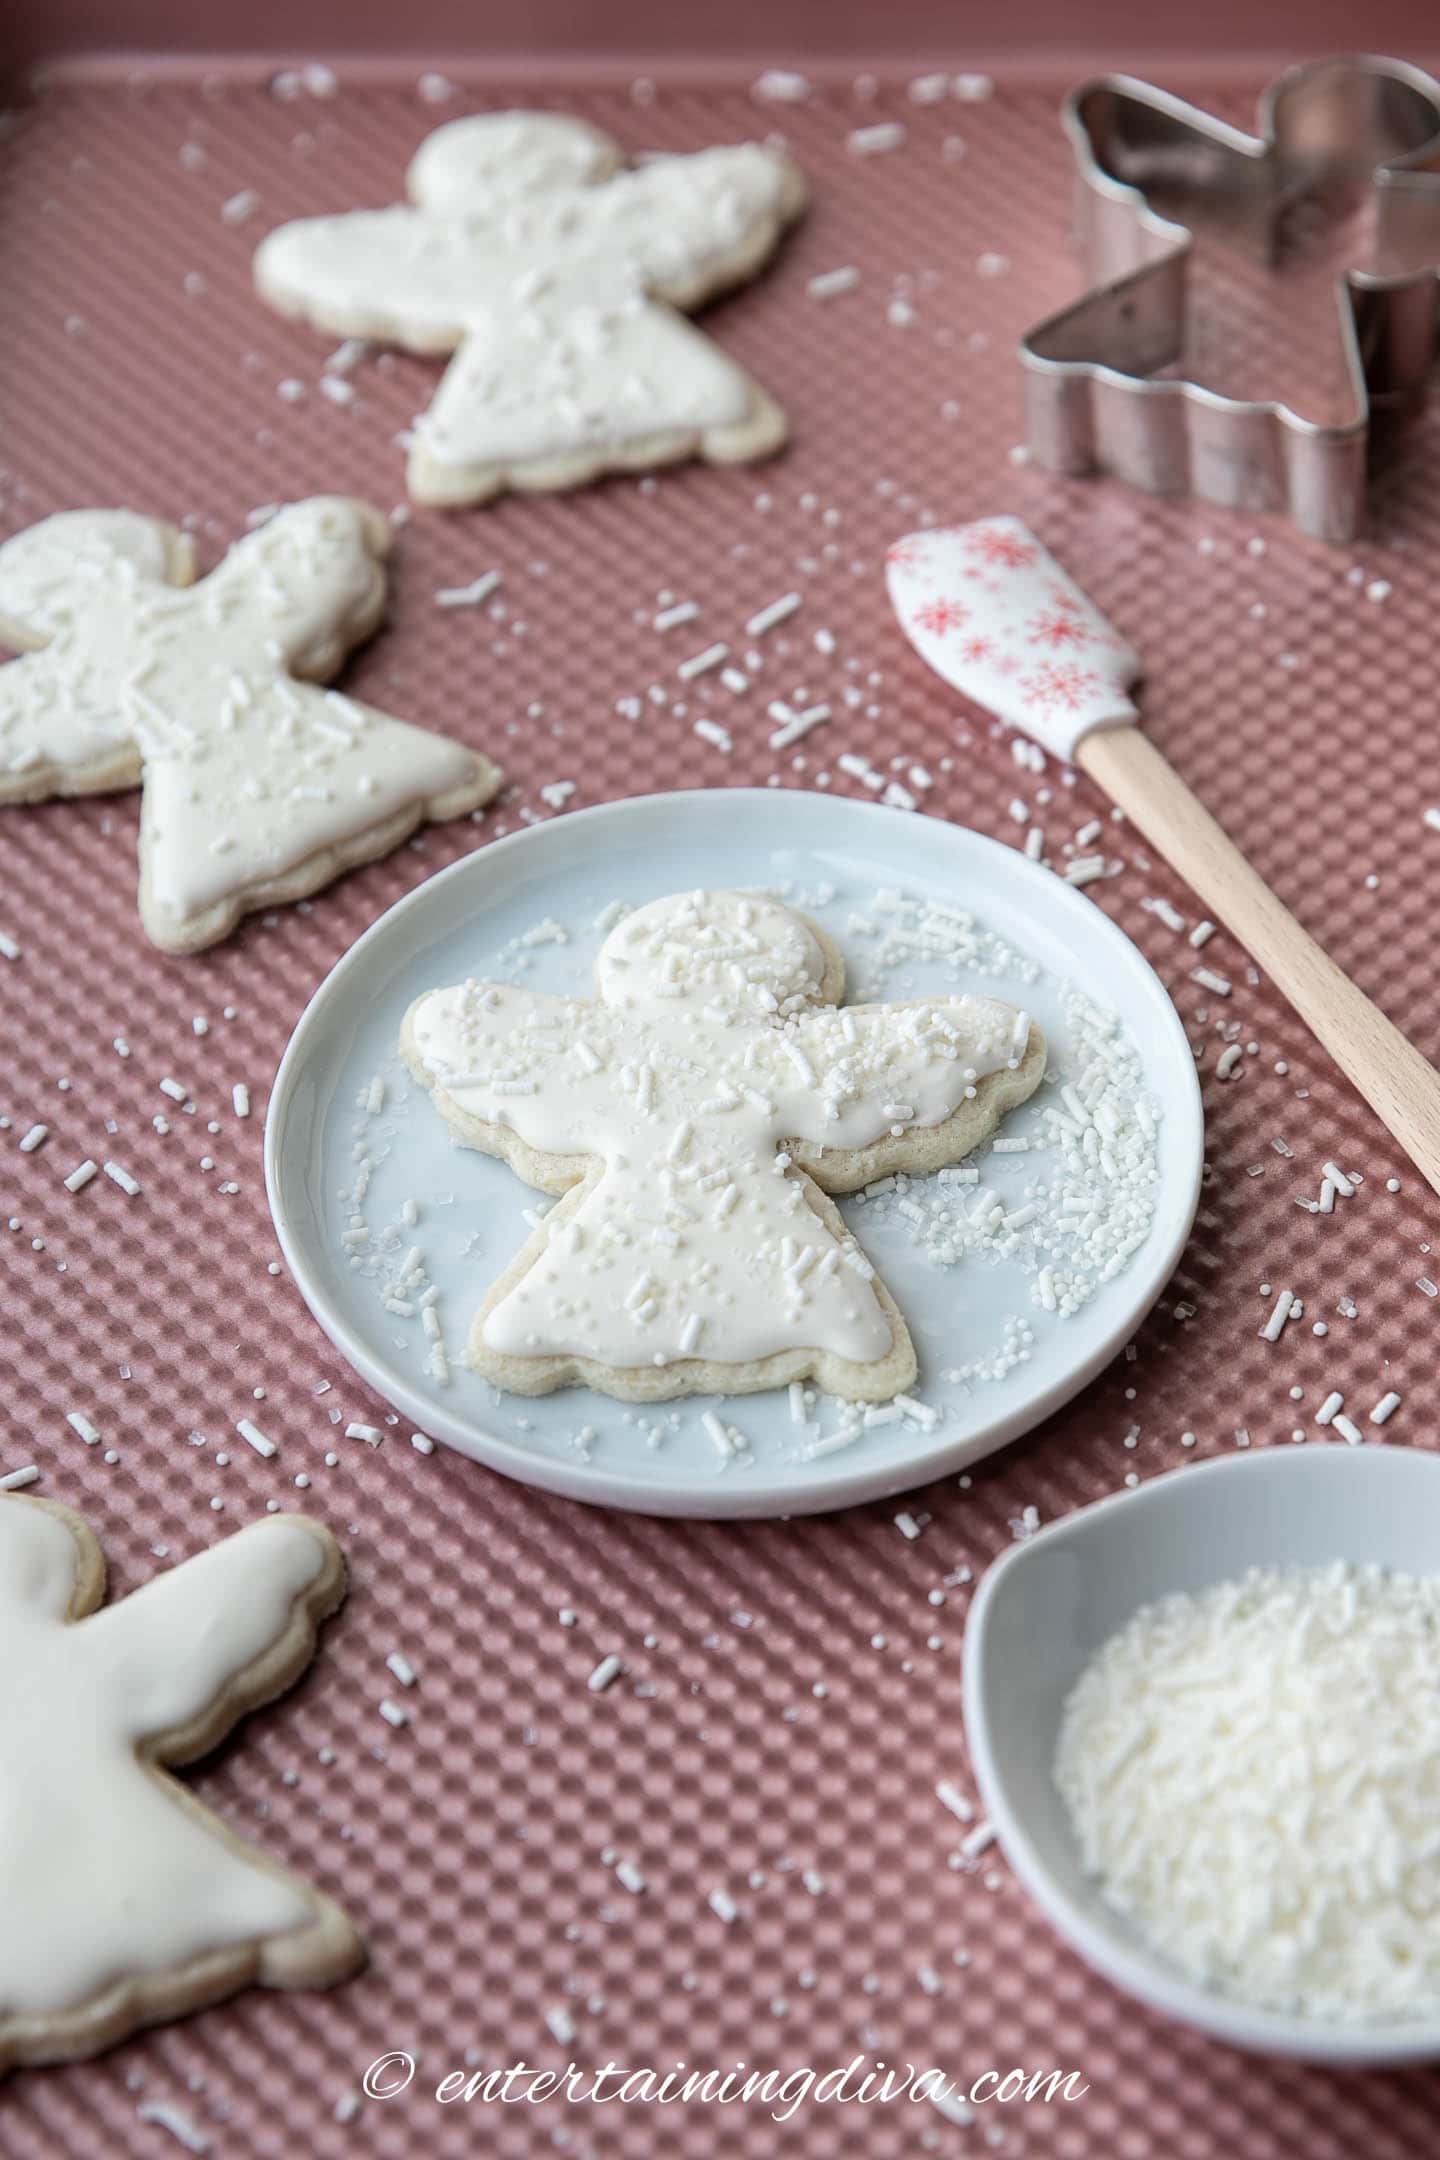 Christmas angel sugar cookies decorated with white royal icing and sprinkles on a plate